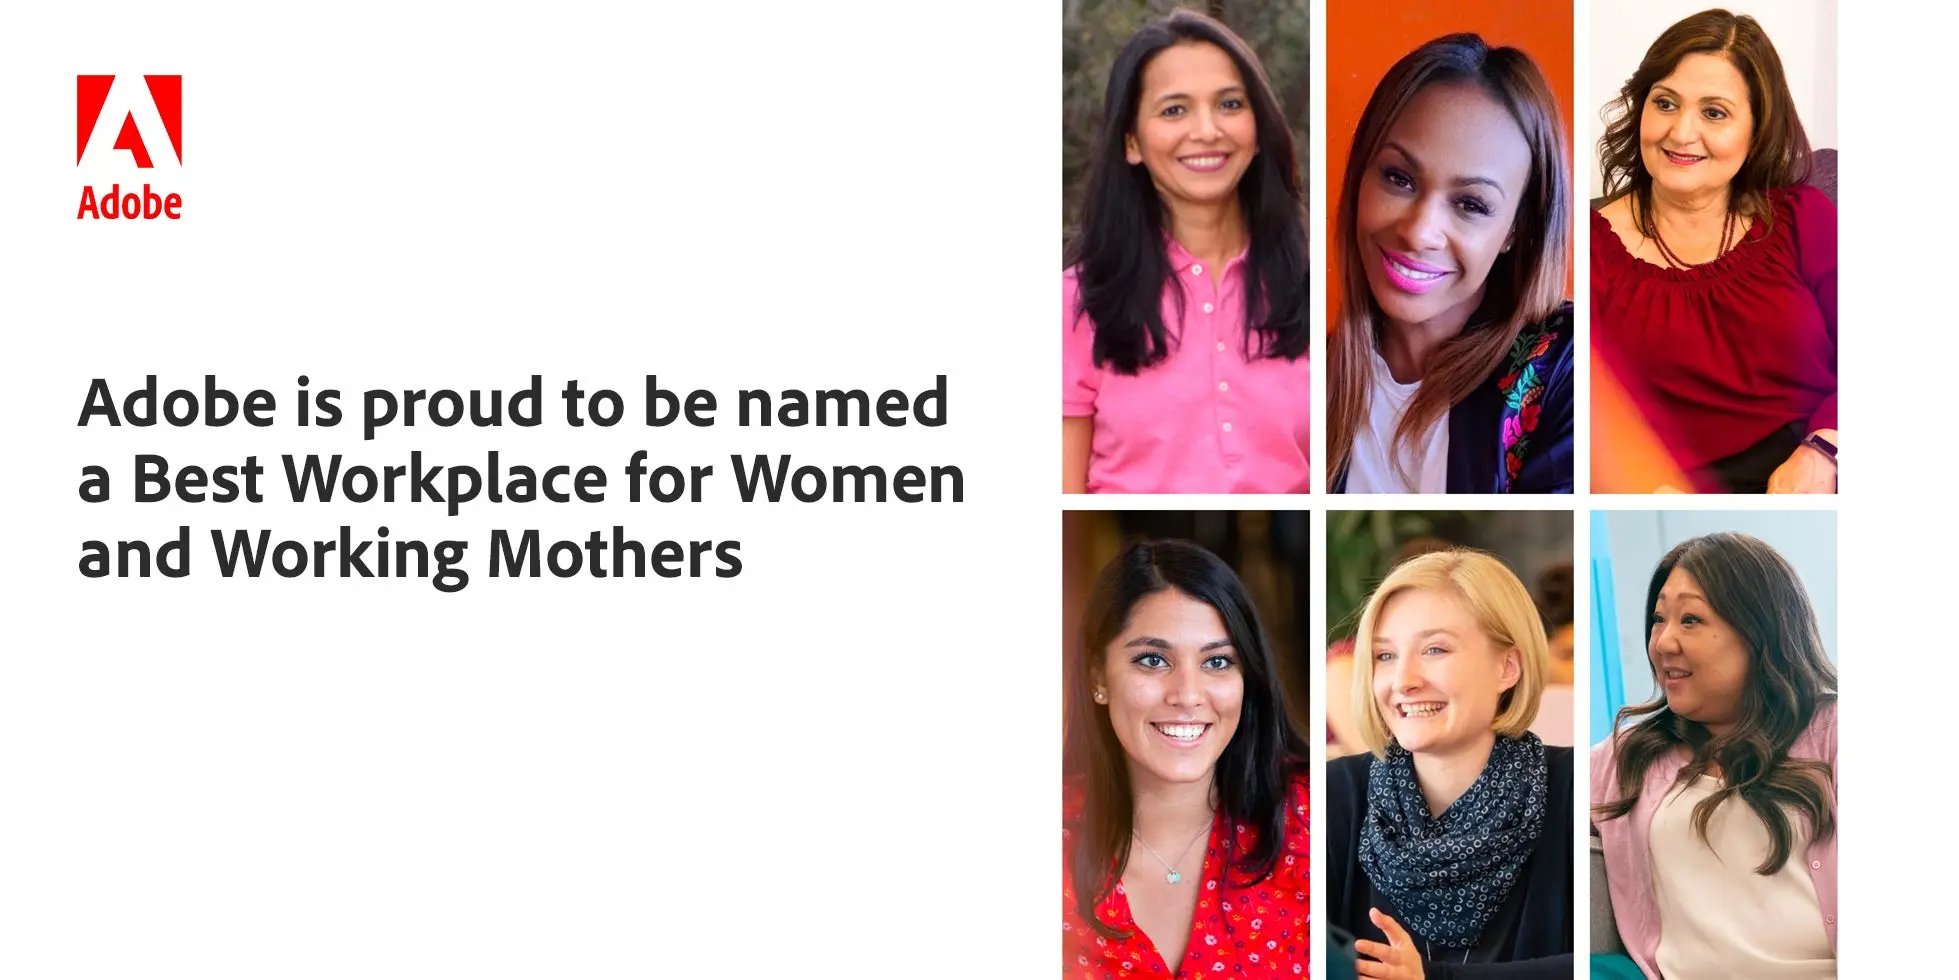 Adobe is proud to be named a Best Workplace for Women and Working Mothers